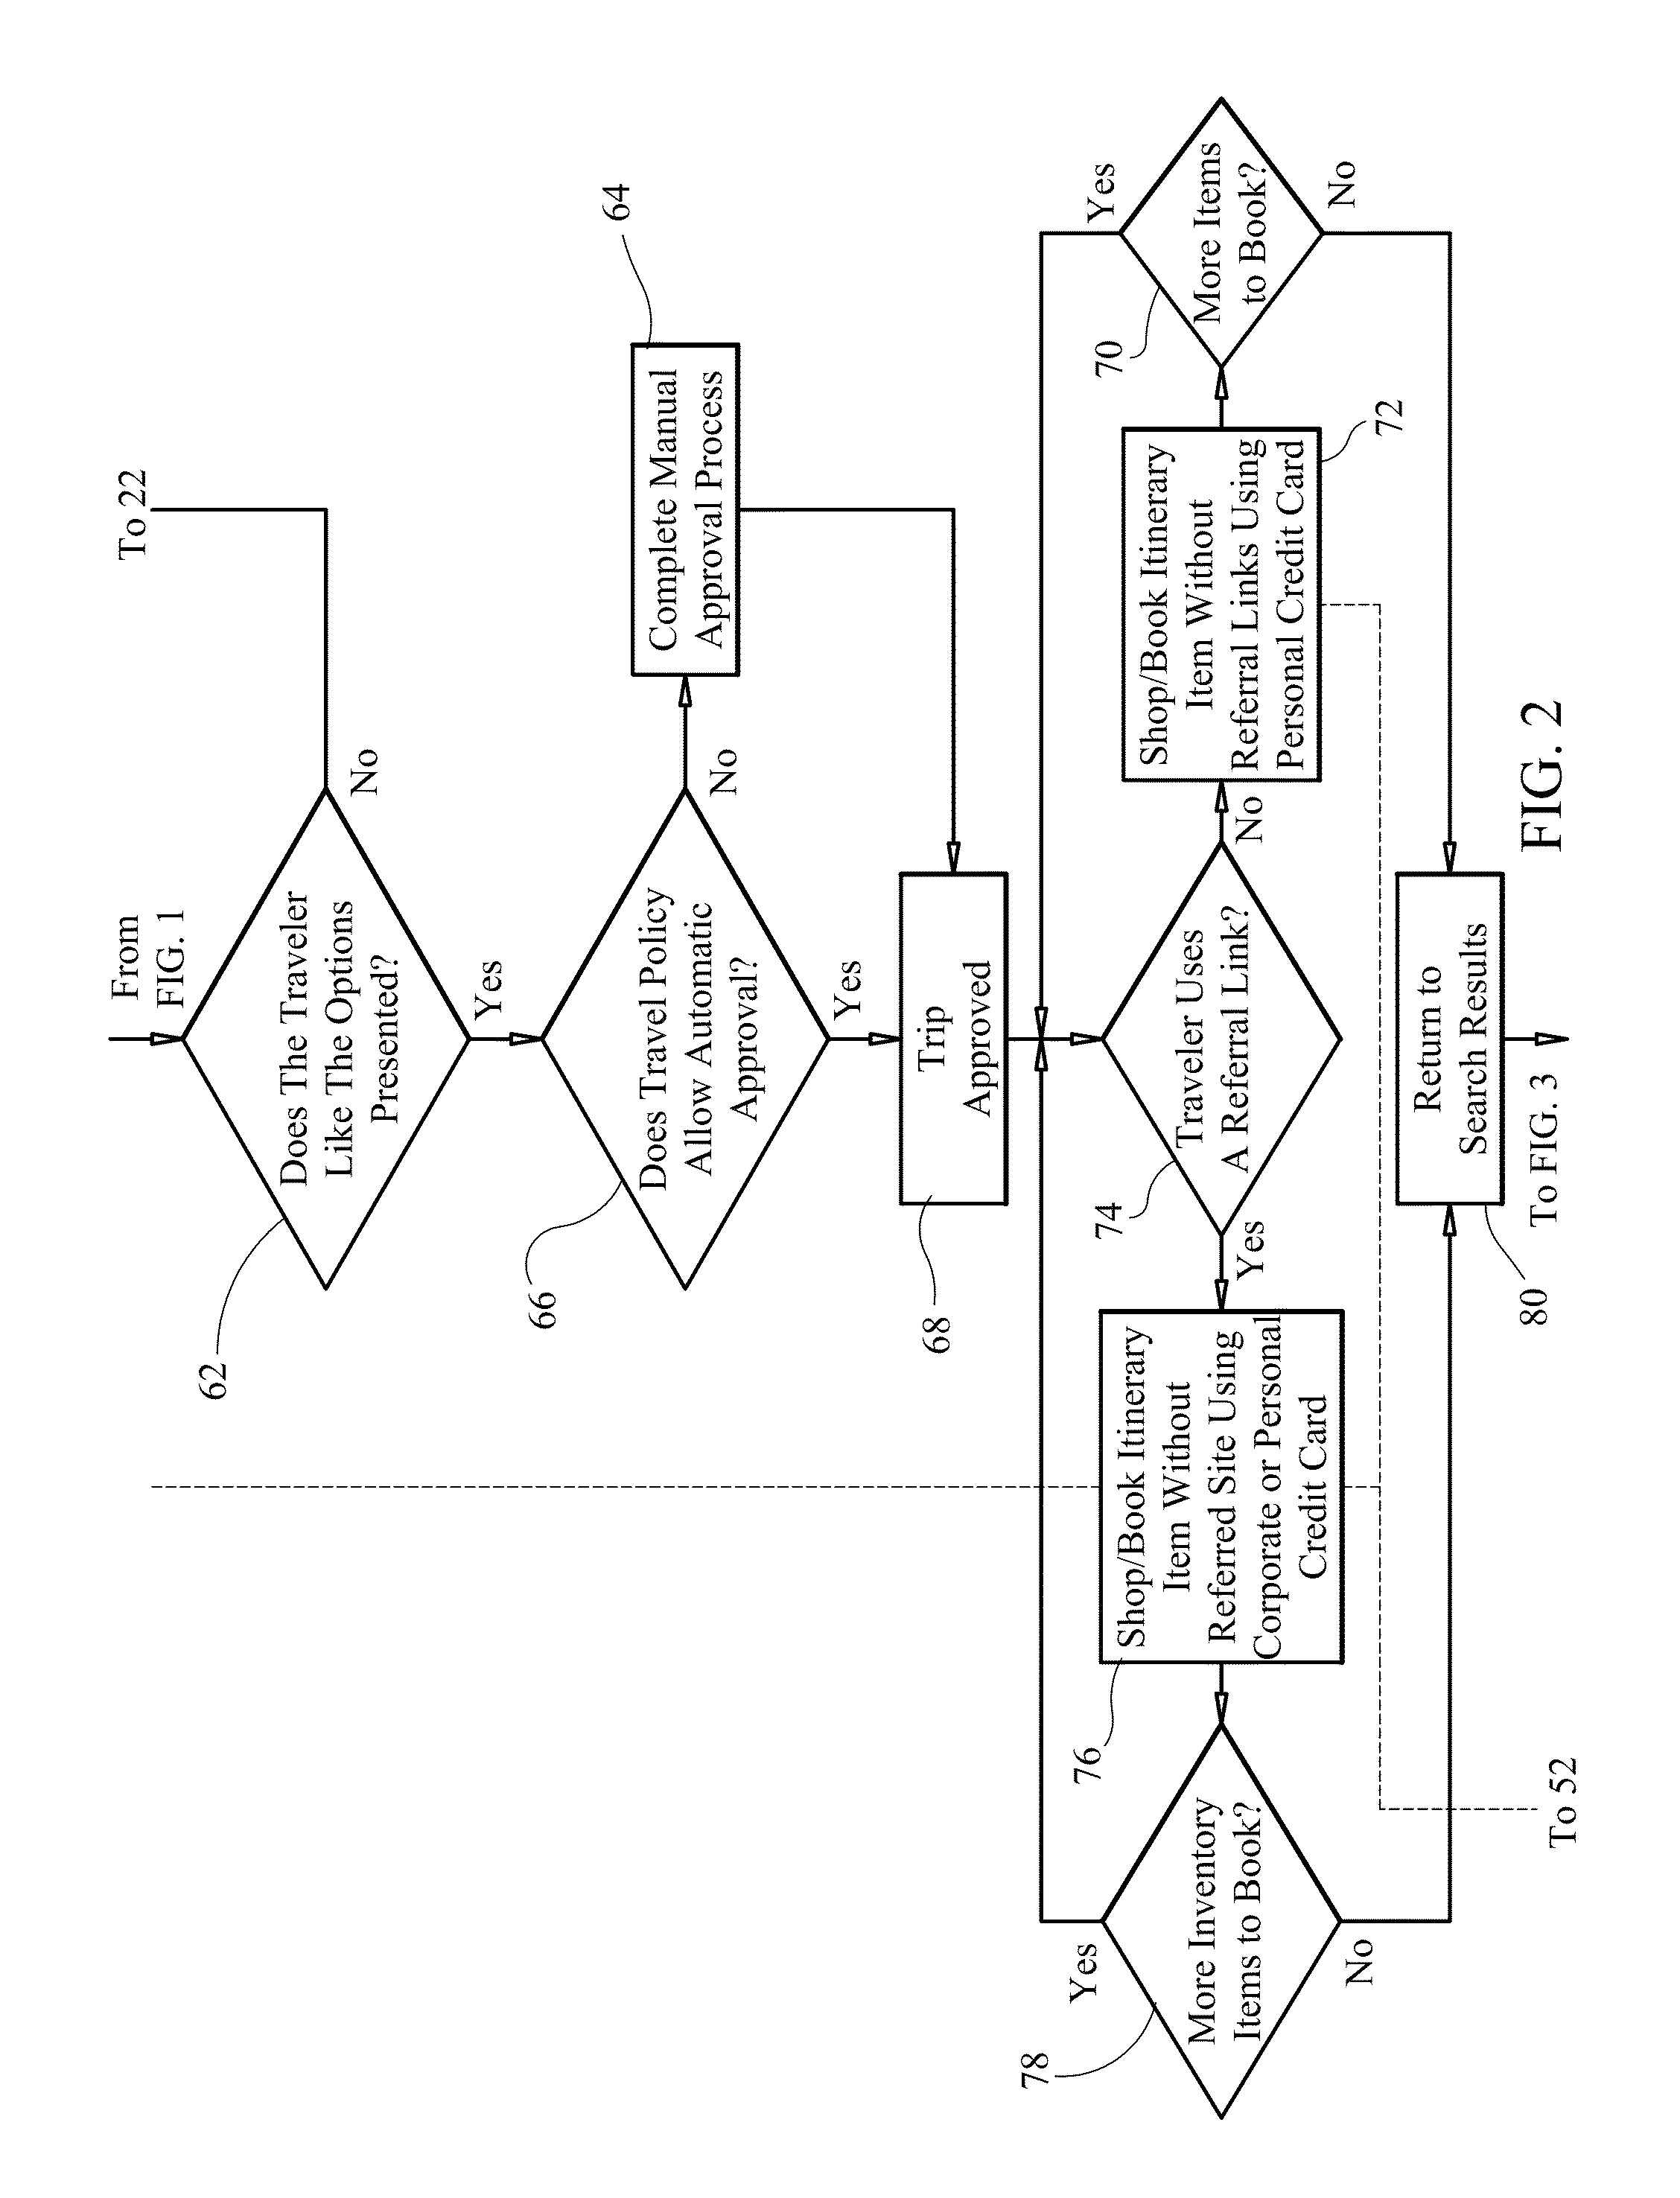 Travel management system and method